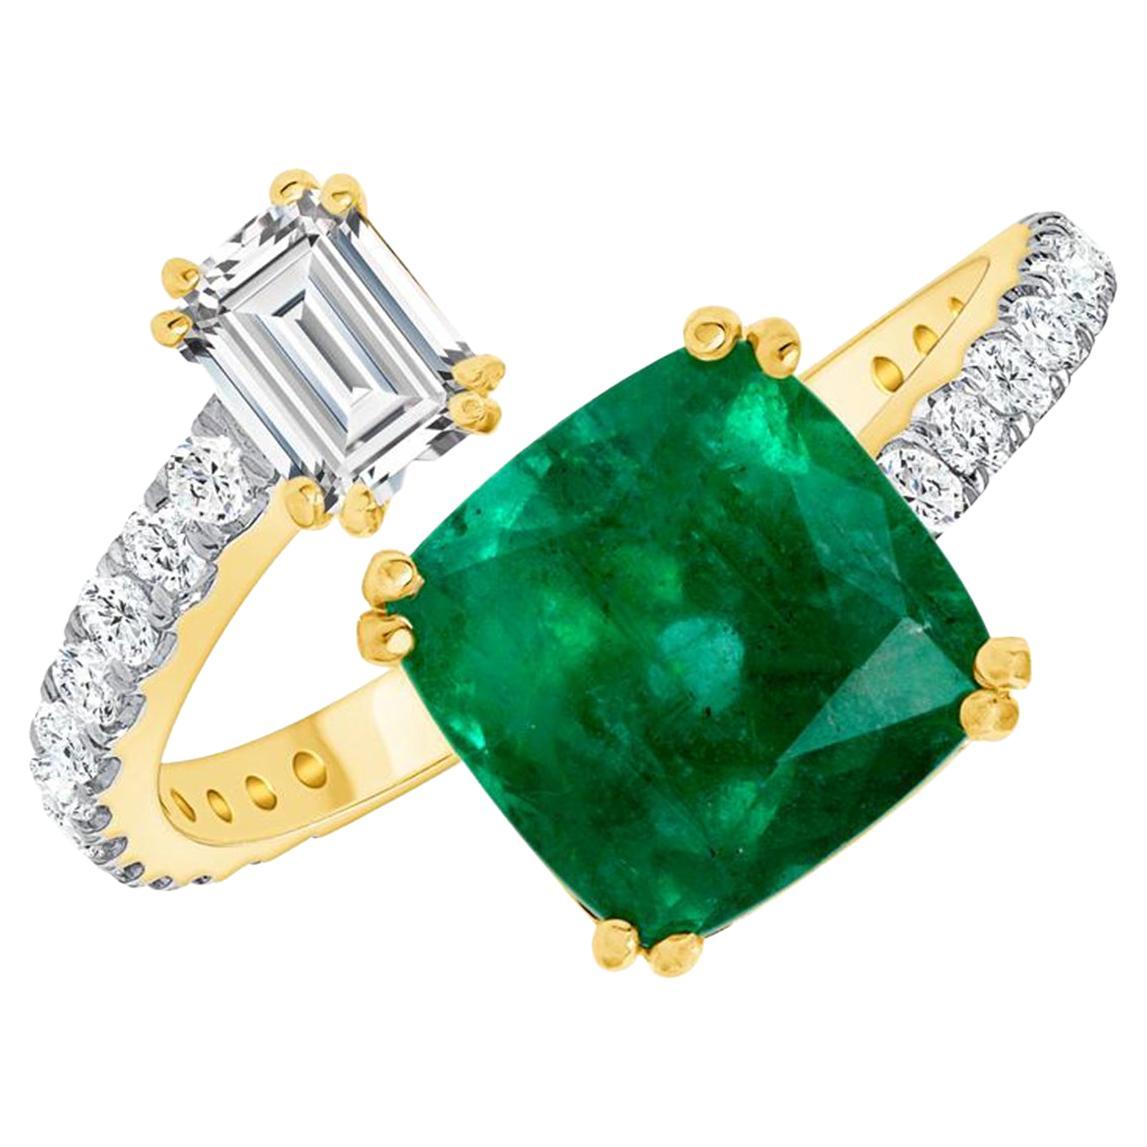 2.55 Ct Colombian Emerald and 0.52 Ct Diamonds in 14k Yellow Gold